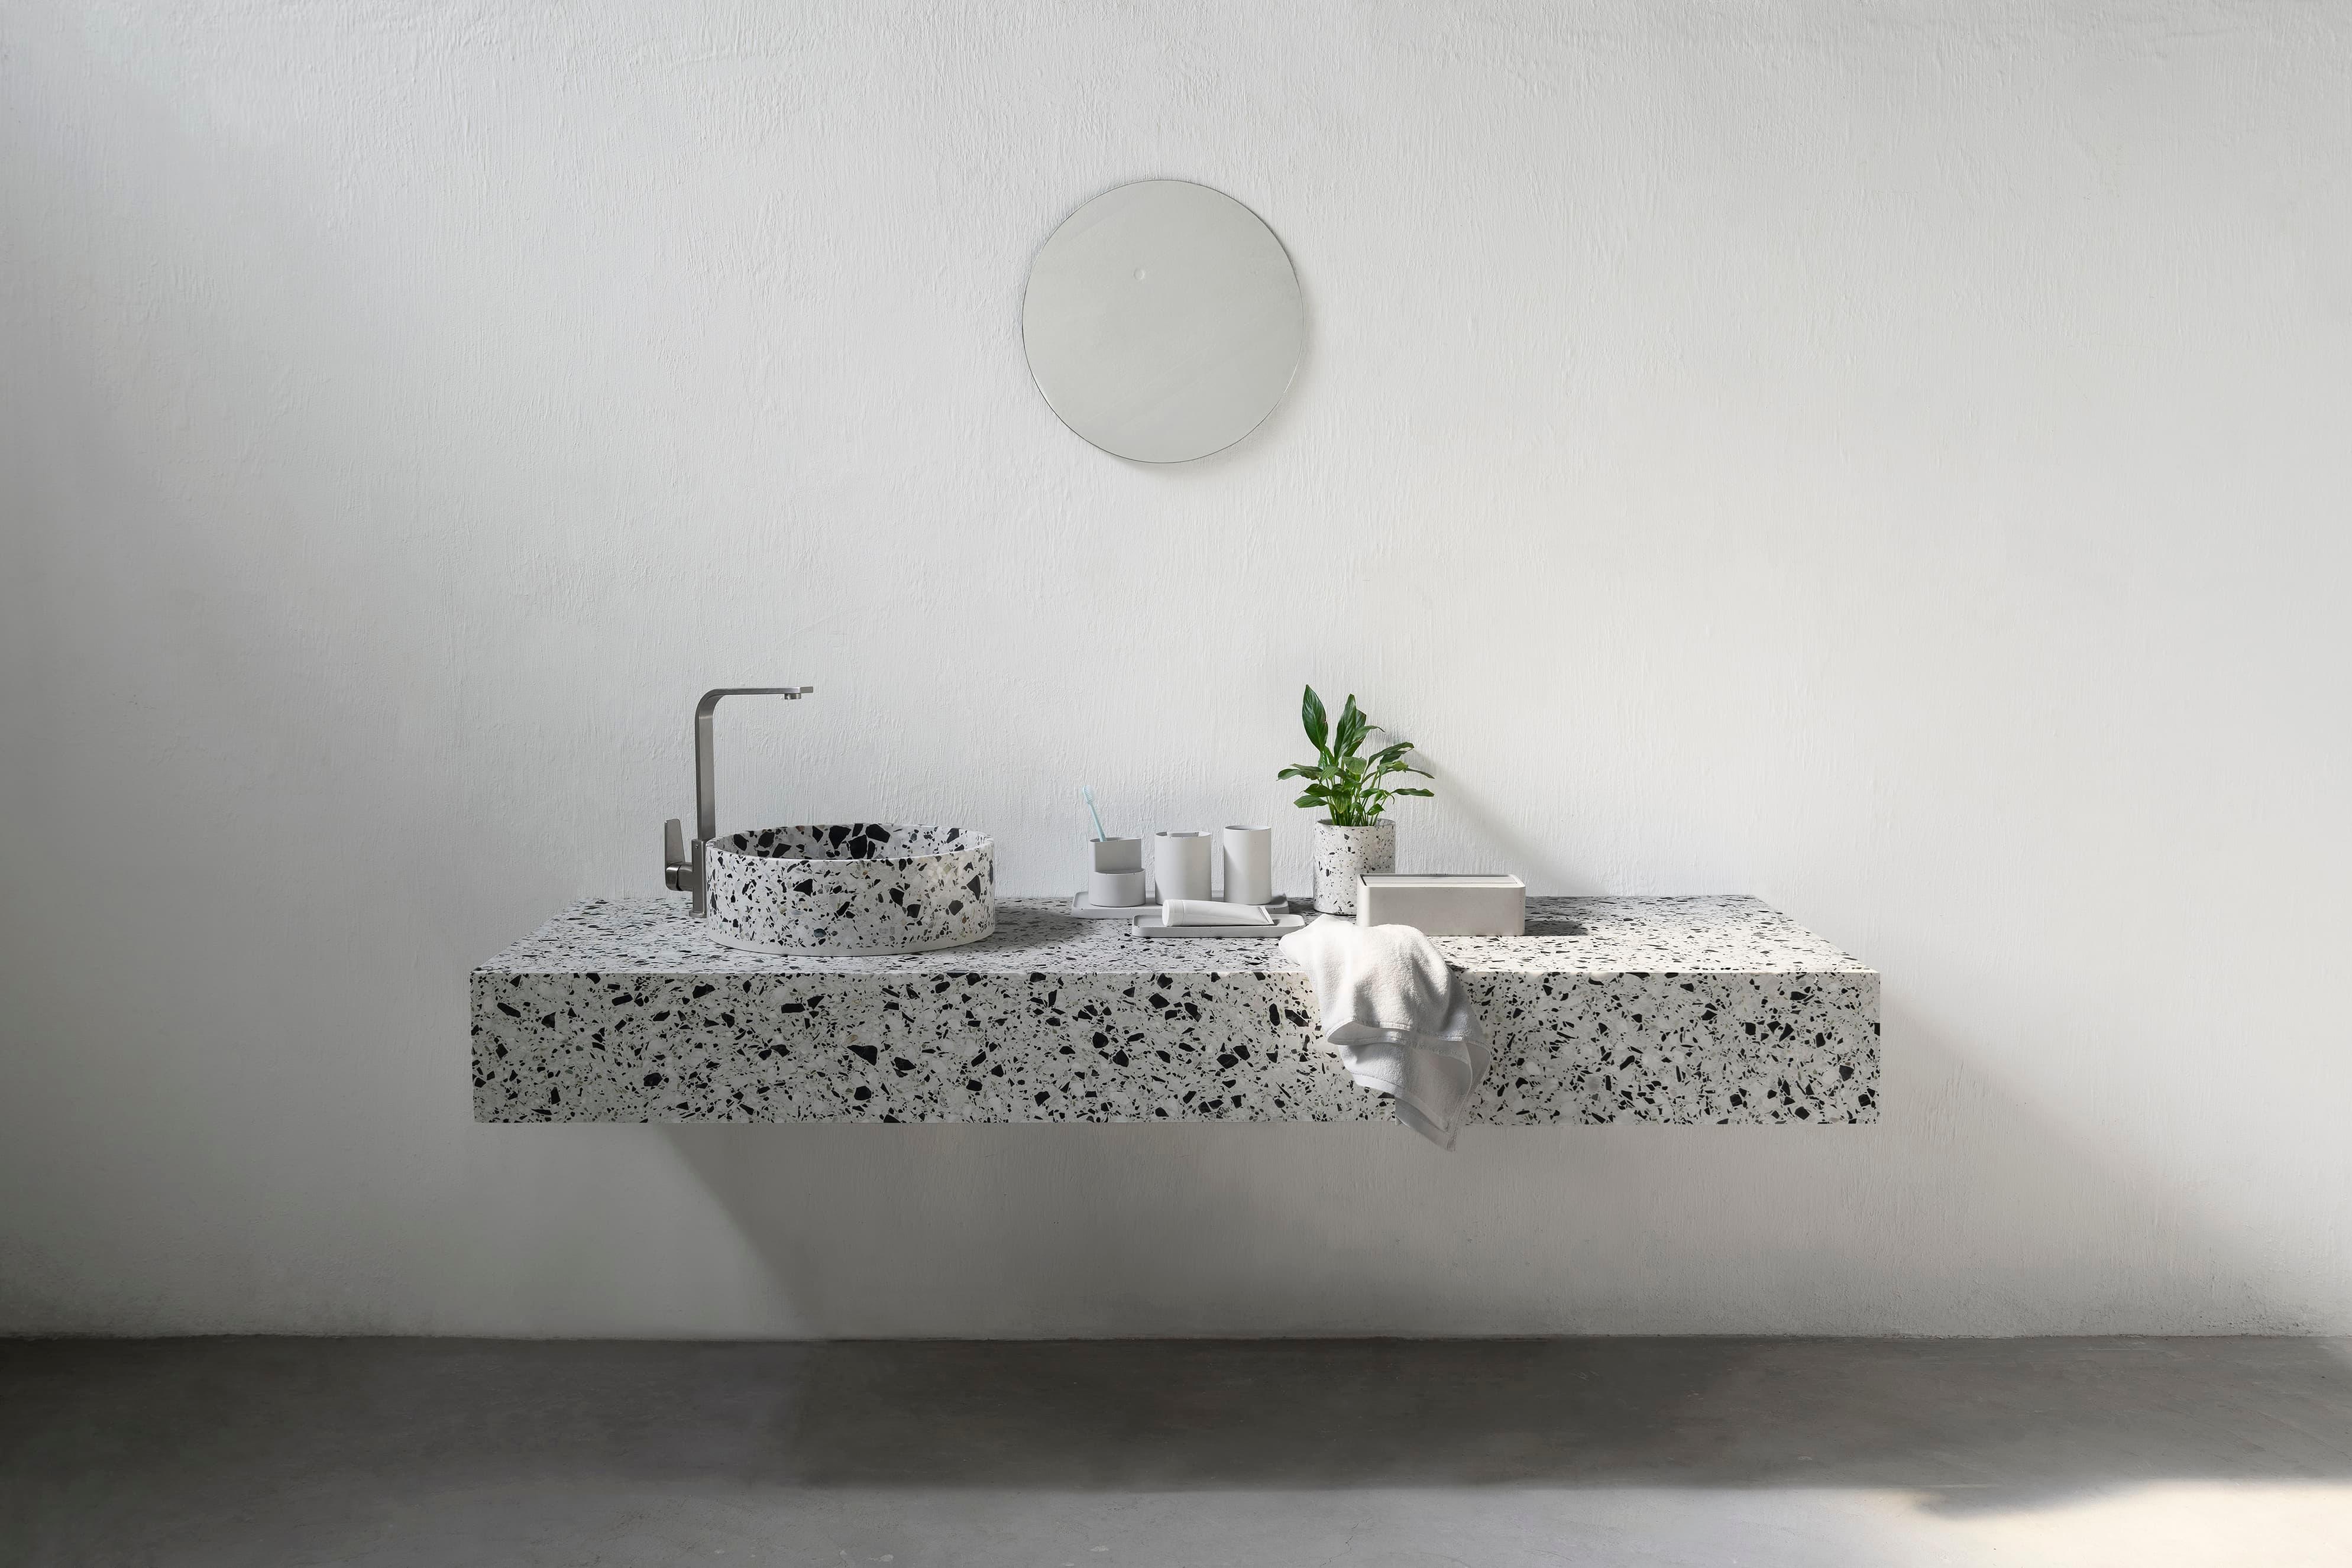 'HUI' is a wash basin / vessel sink made of terrazzo
by Bentu design

Terrazzo colors: White, black, red, sky blue, green mint
Dimensions: H 13 cm, D 40.8 cm

The basin comes with a drainer. 

Bentu design's furniture derives its uniqueness from the